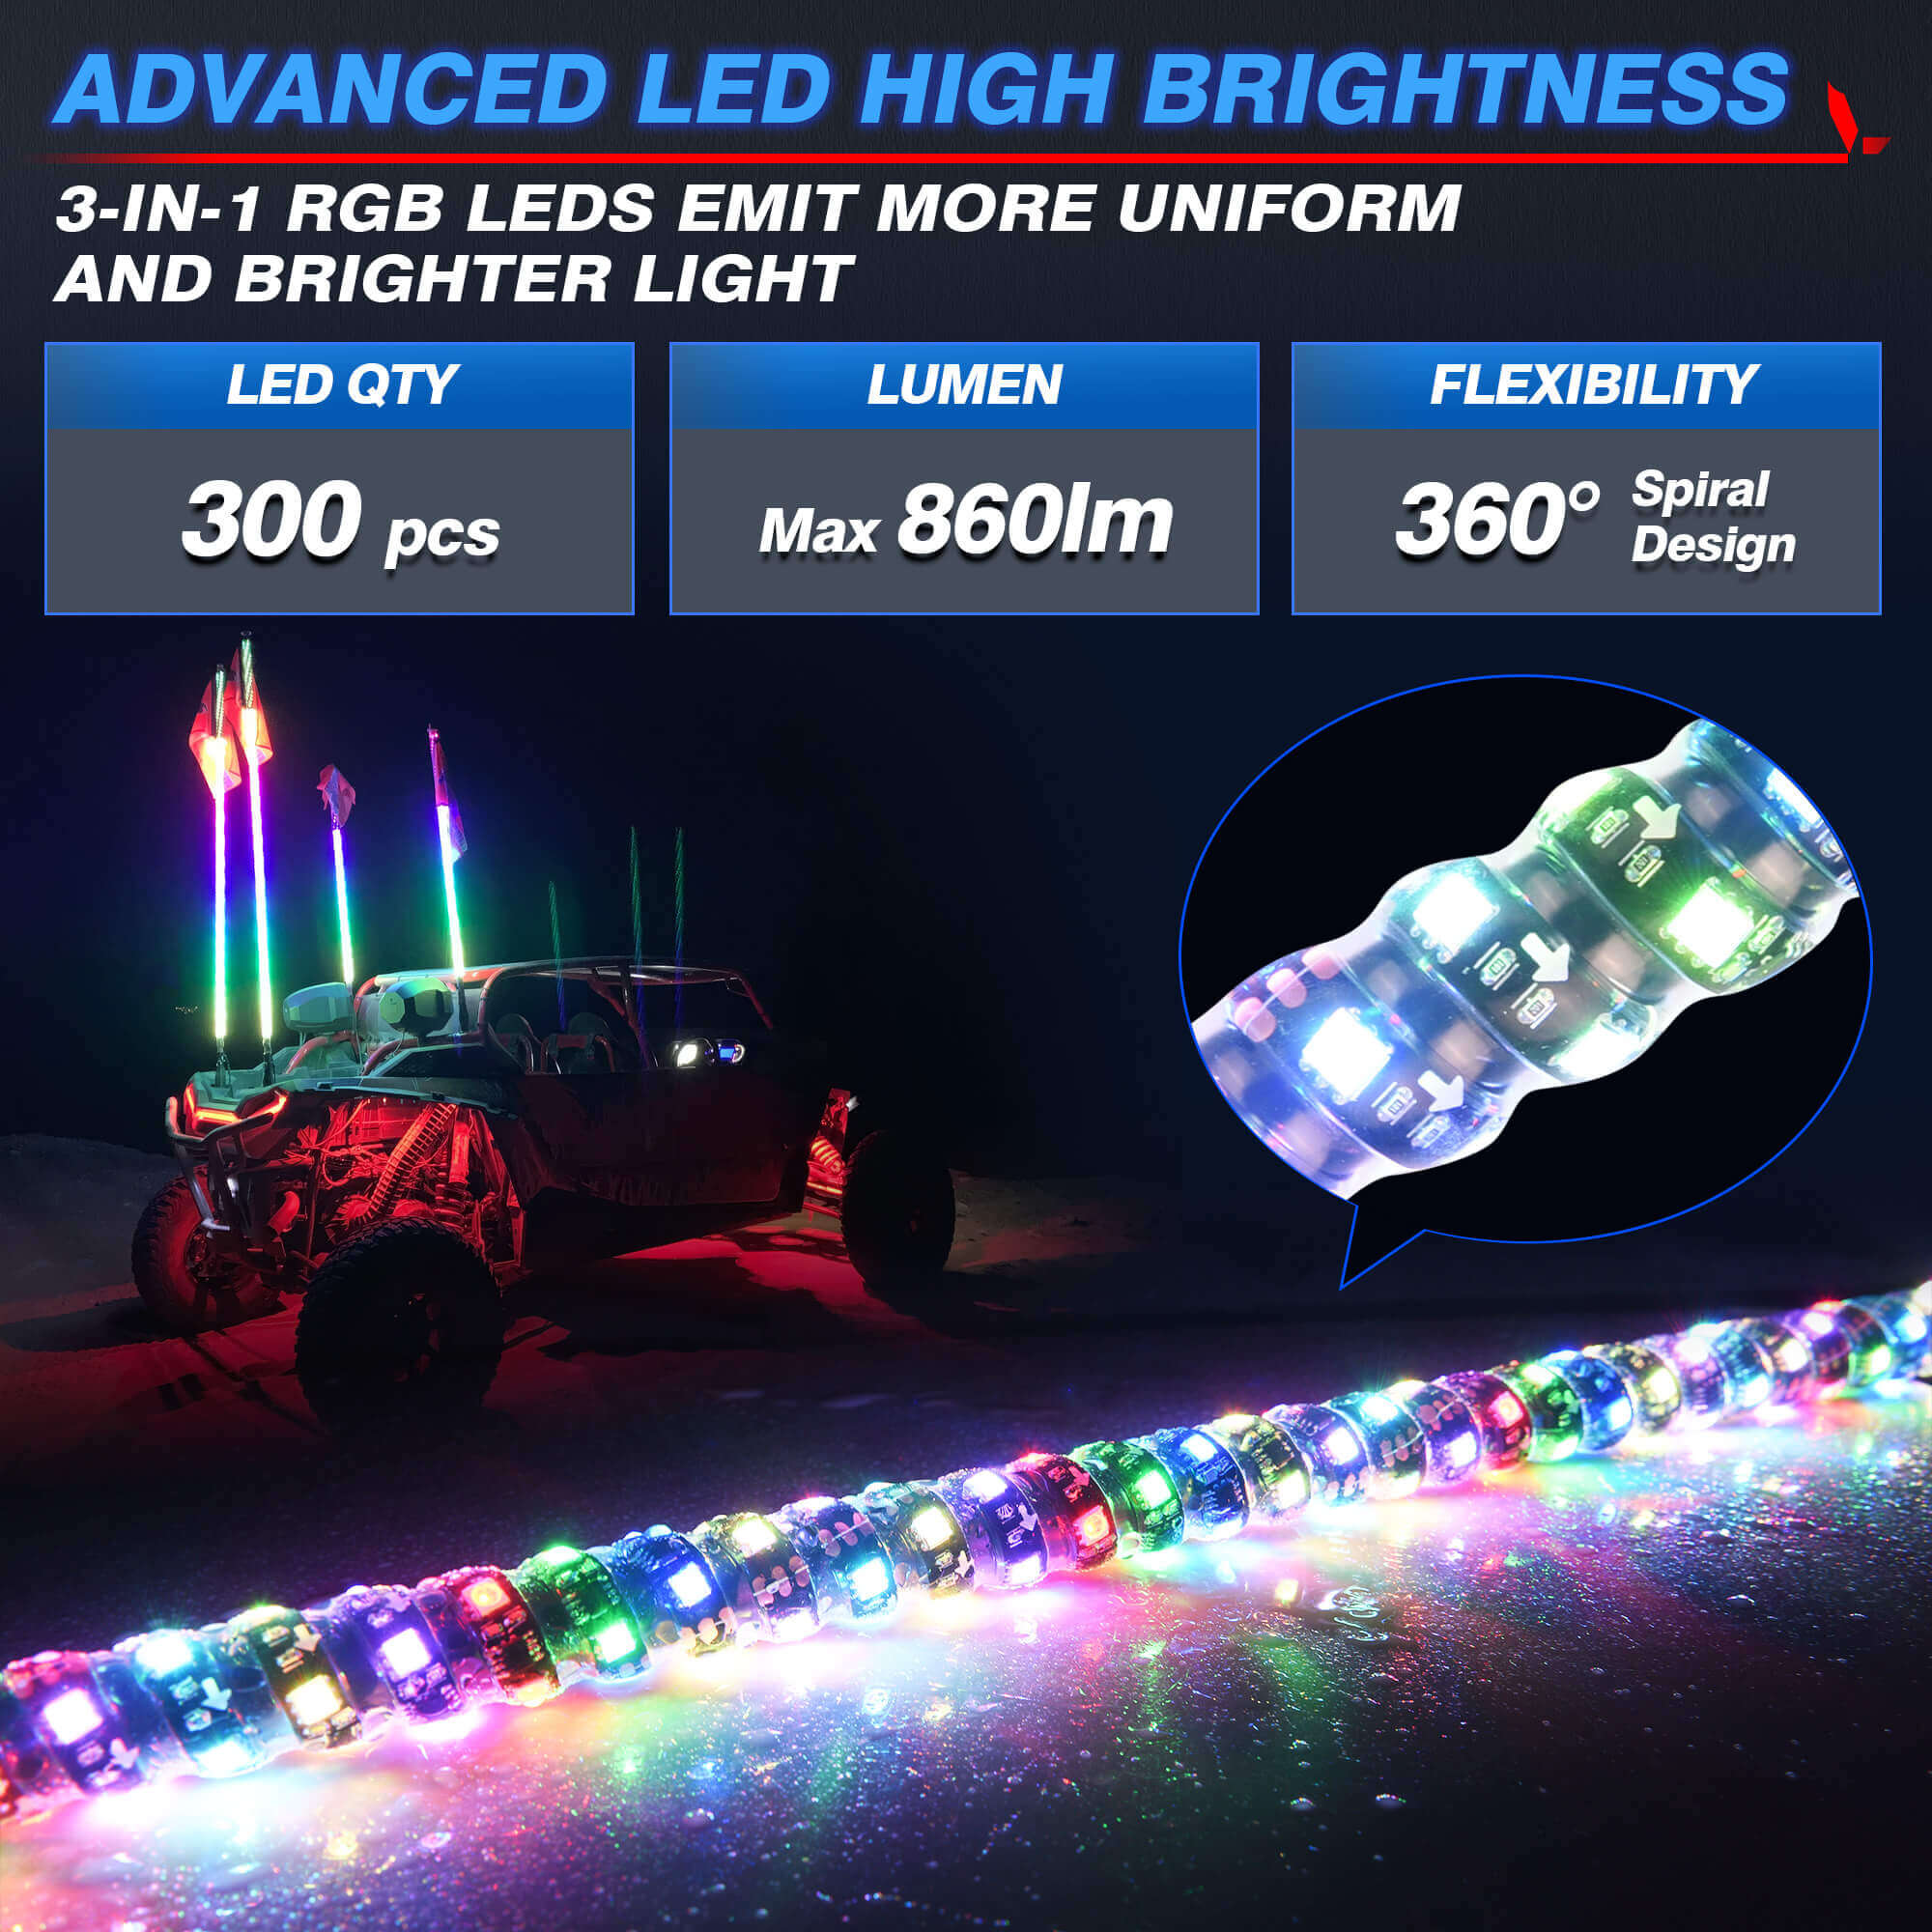 Leading manufacturer of LED Lighting and Accessories